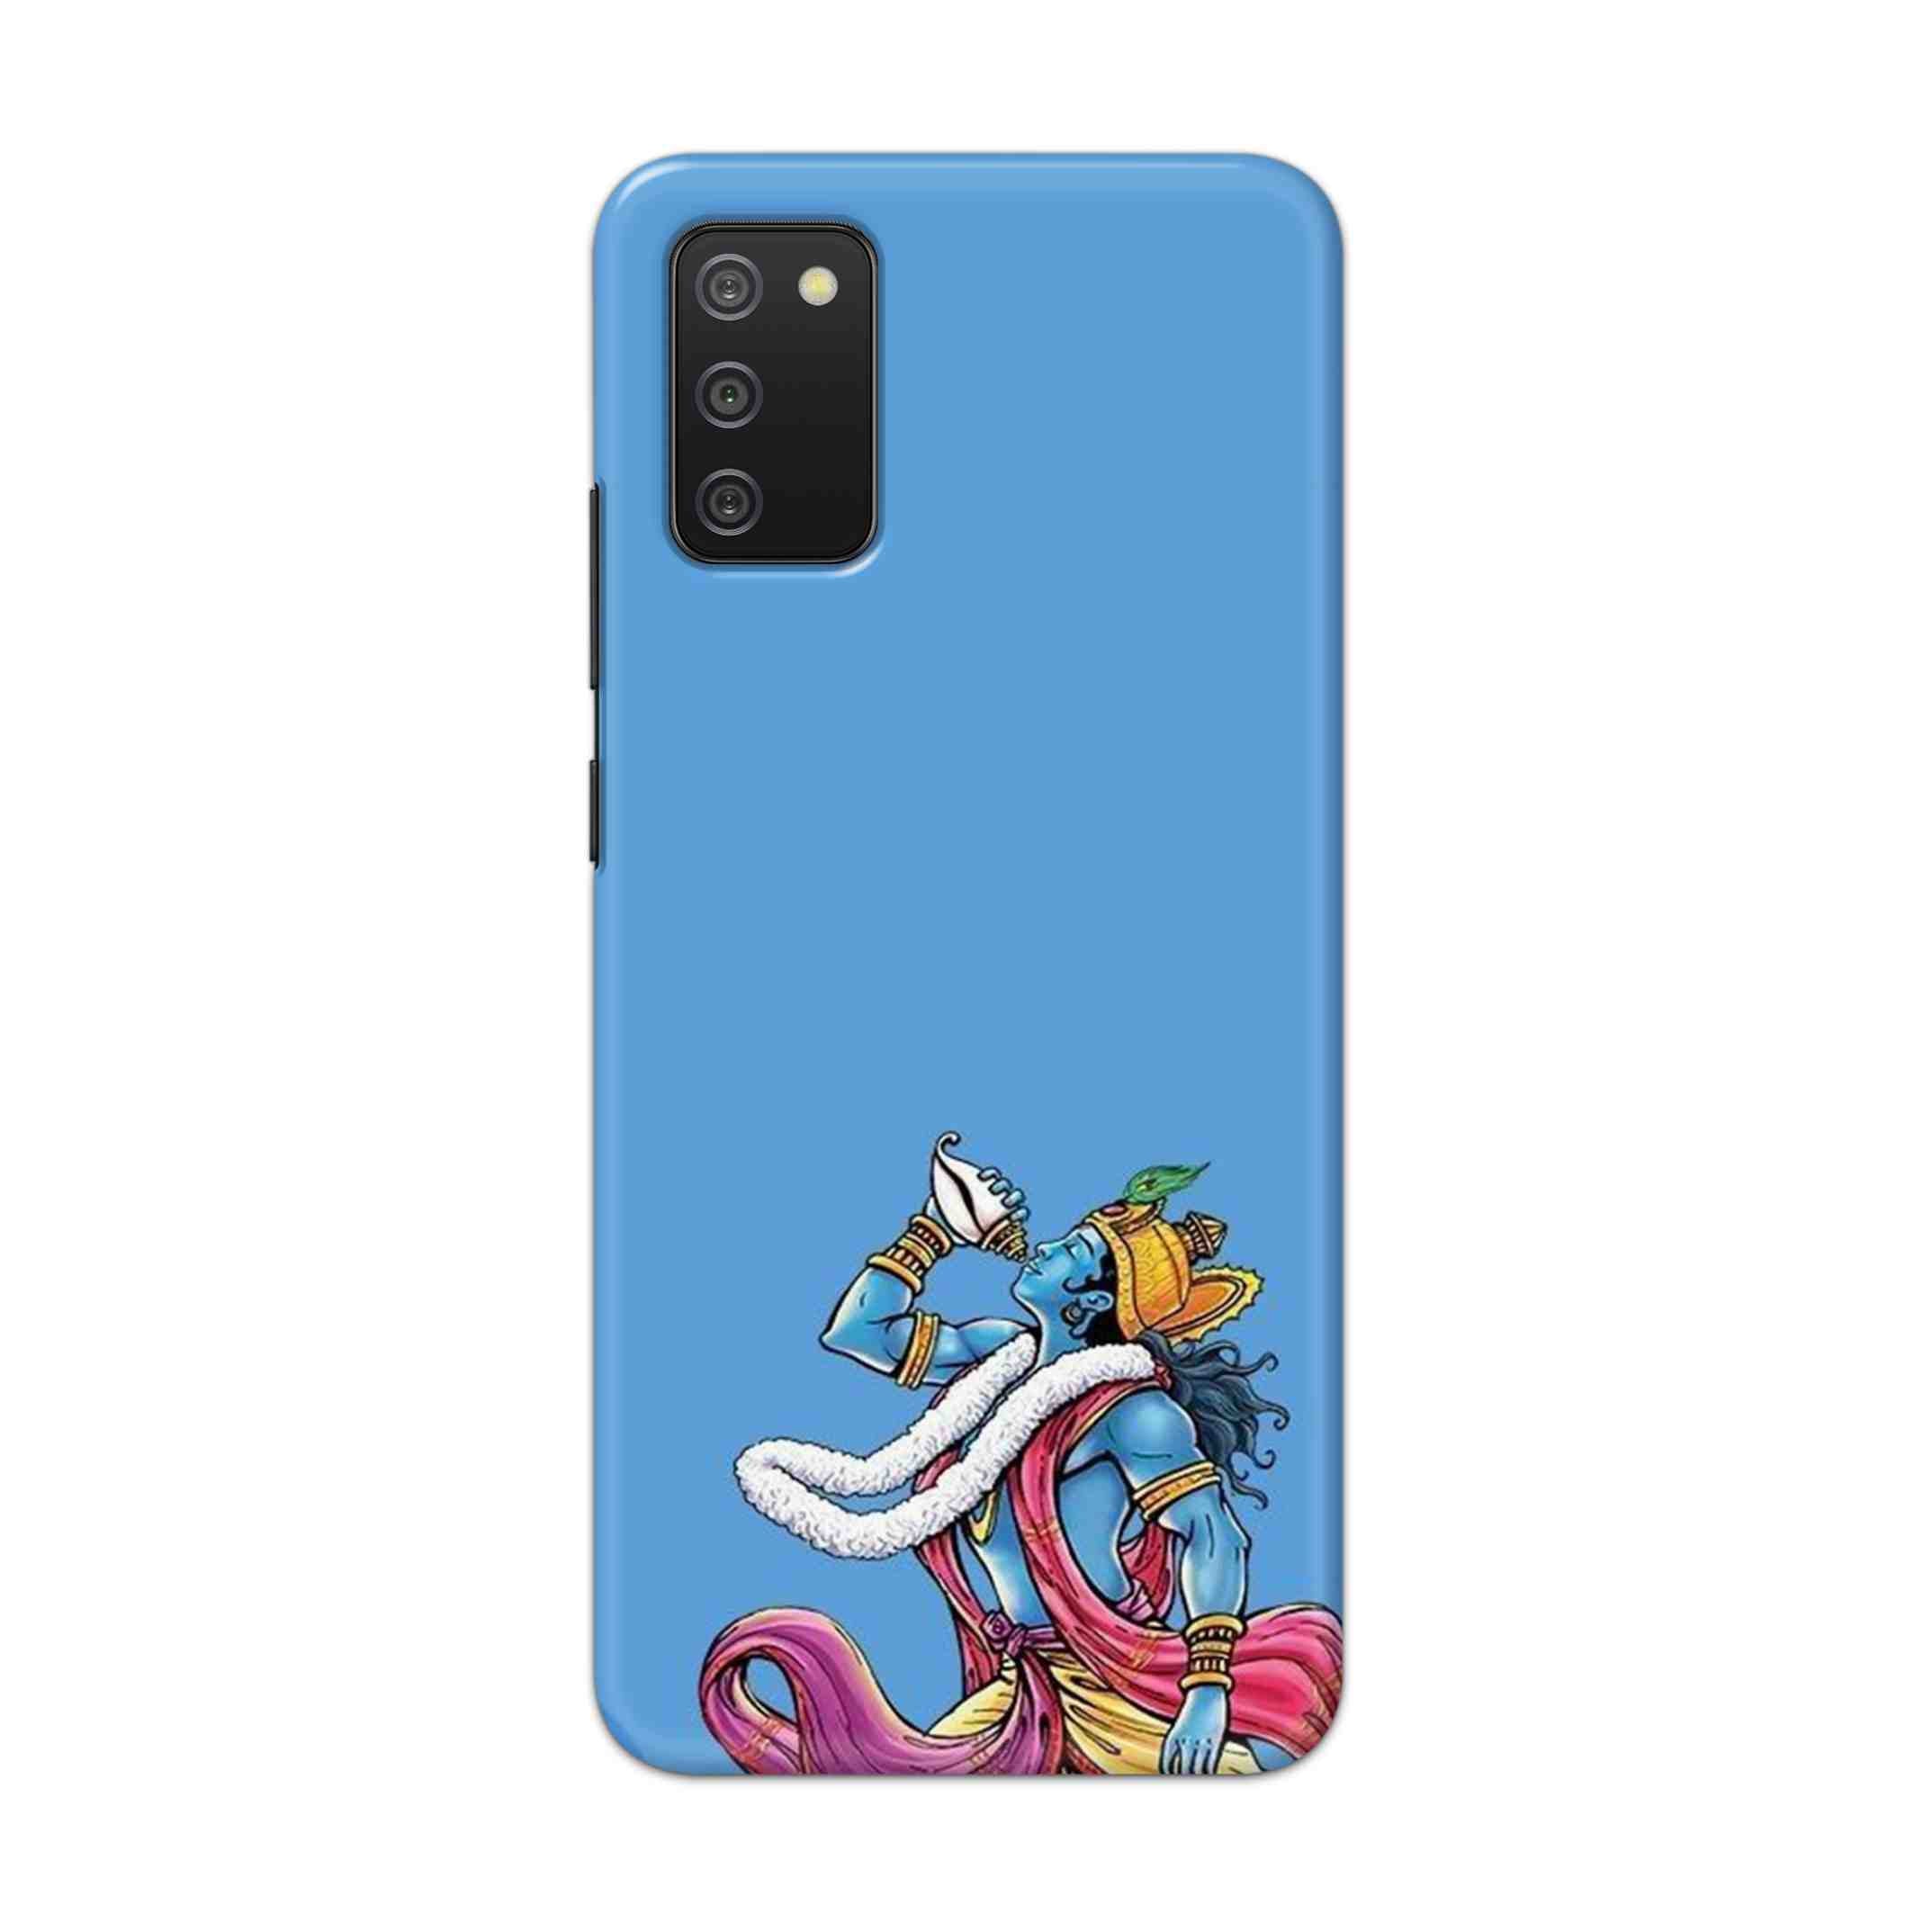 Buy Krishna Hard Back Mobile Phone Case Cover For Samsung Galaxy M02s Online